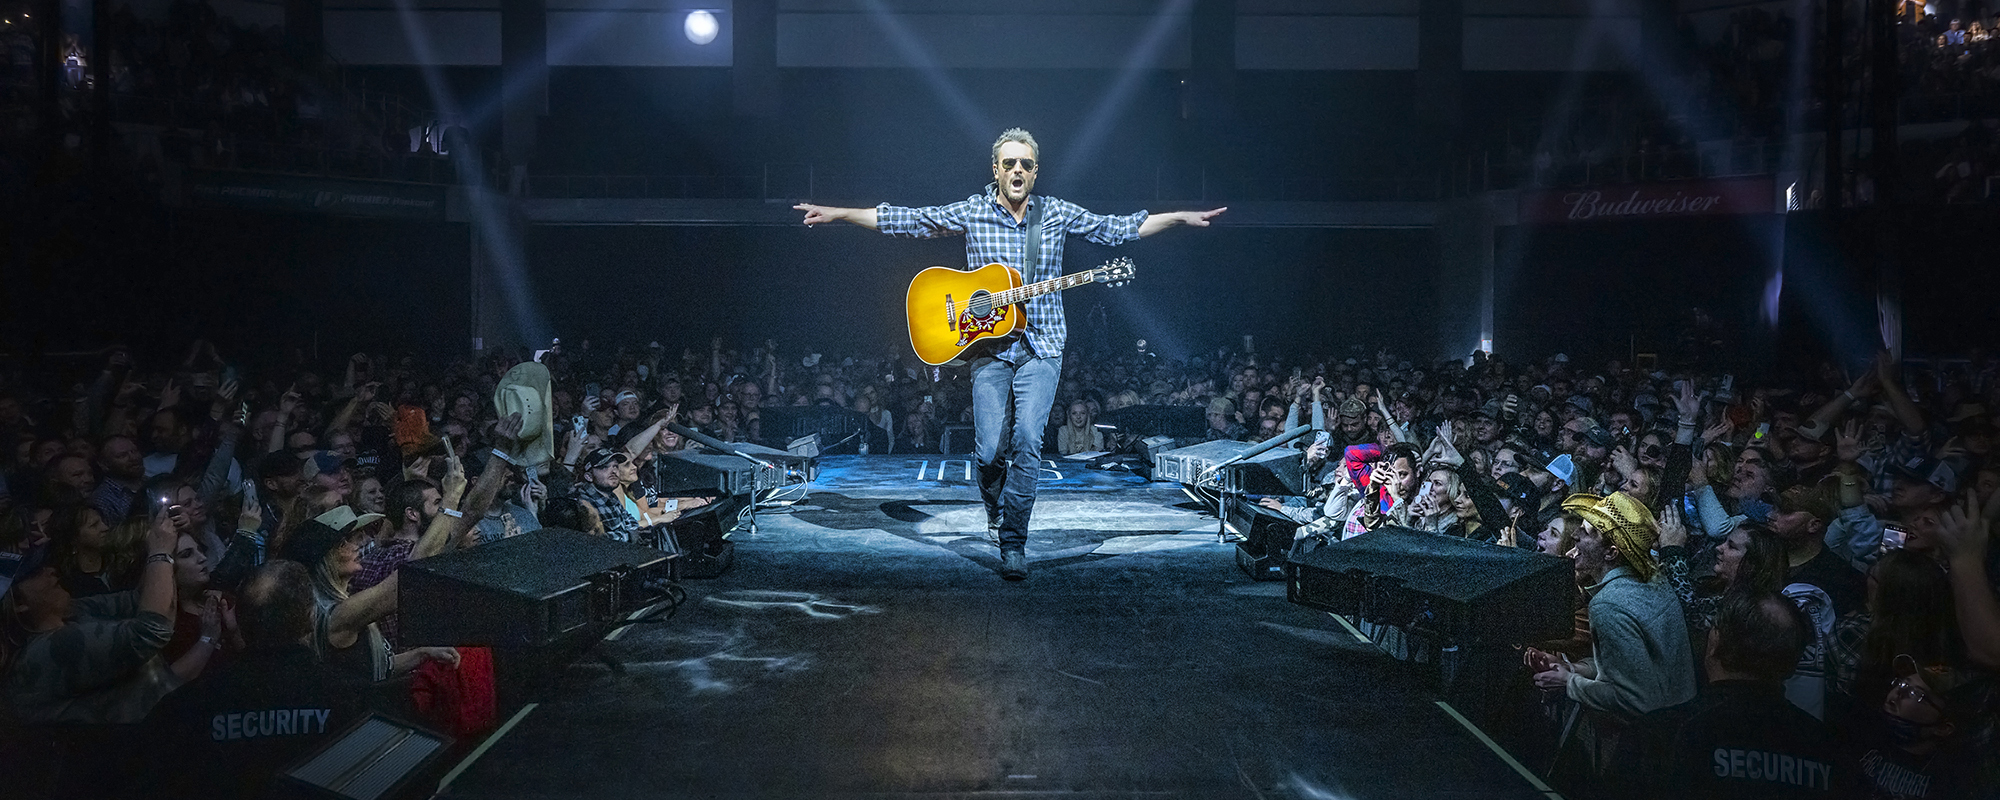 Eric Church Is the Focus of New Country Music Hall of Fame and Museum Exhibit